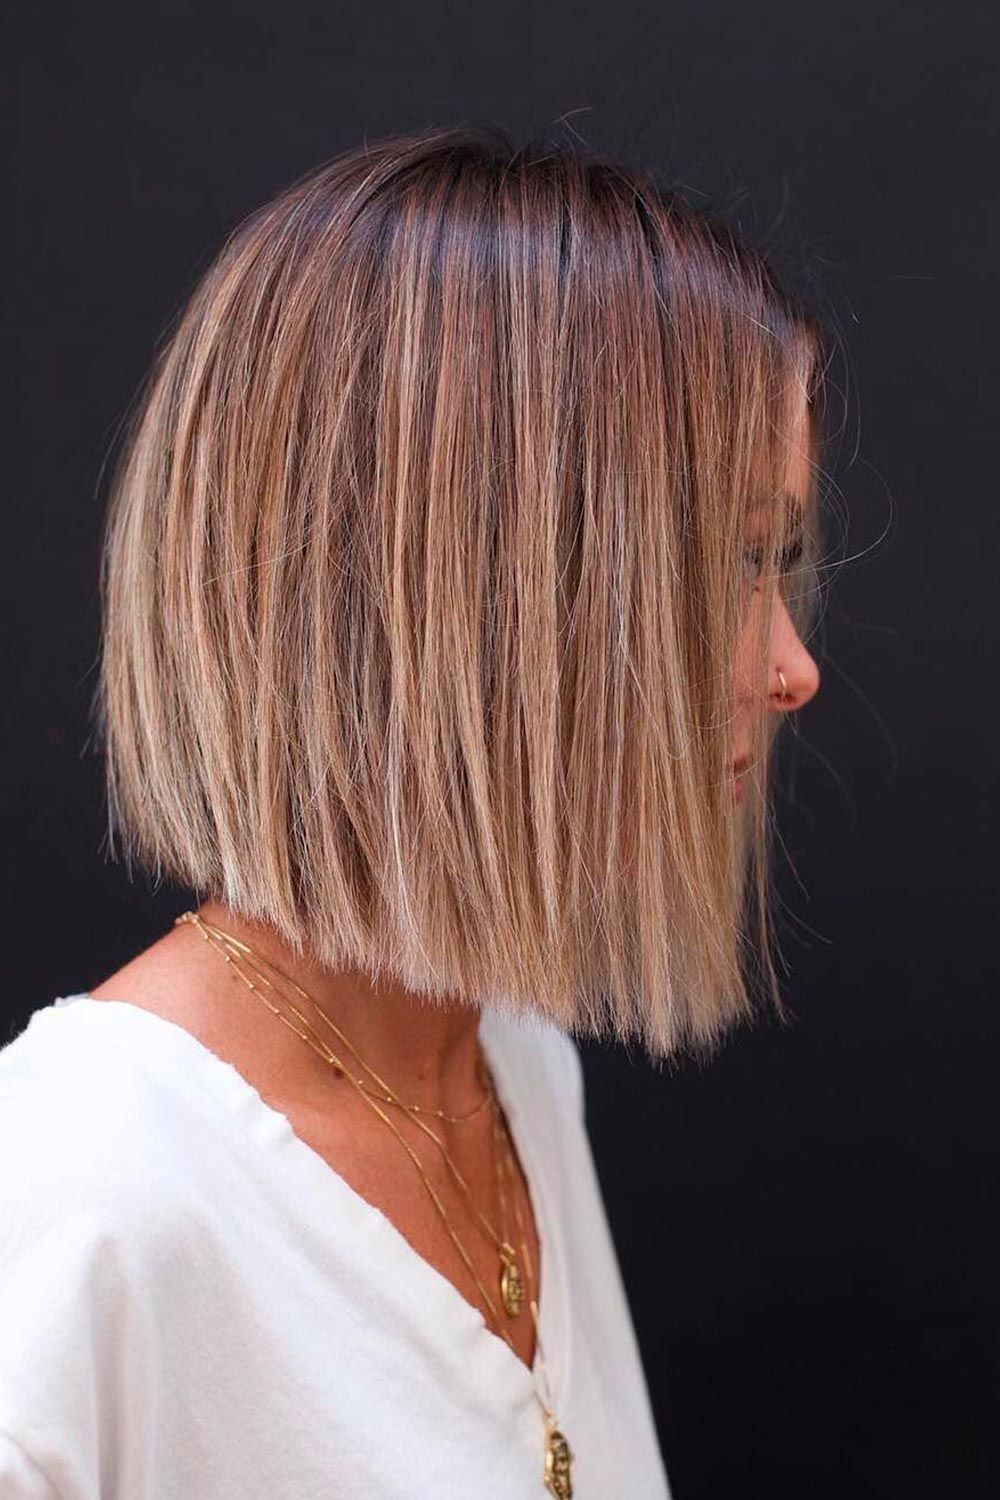 20 Blunt Bob Hairstyles To Wear This Season - Lovehairstyles